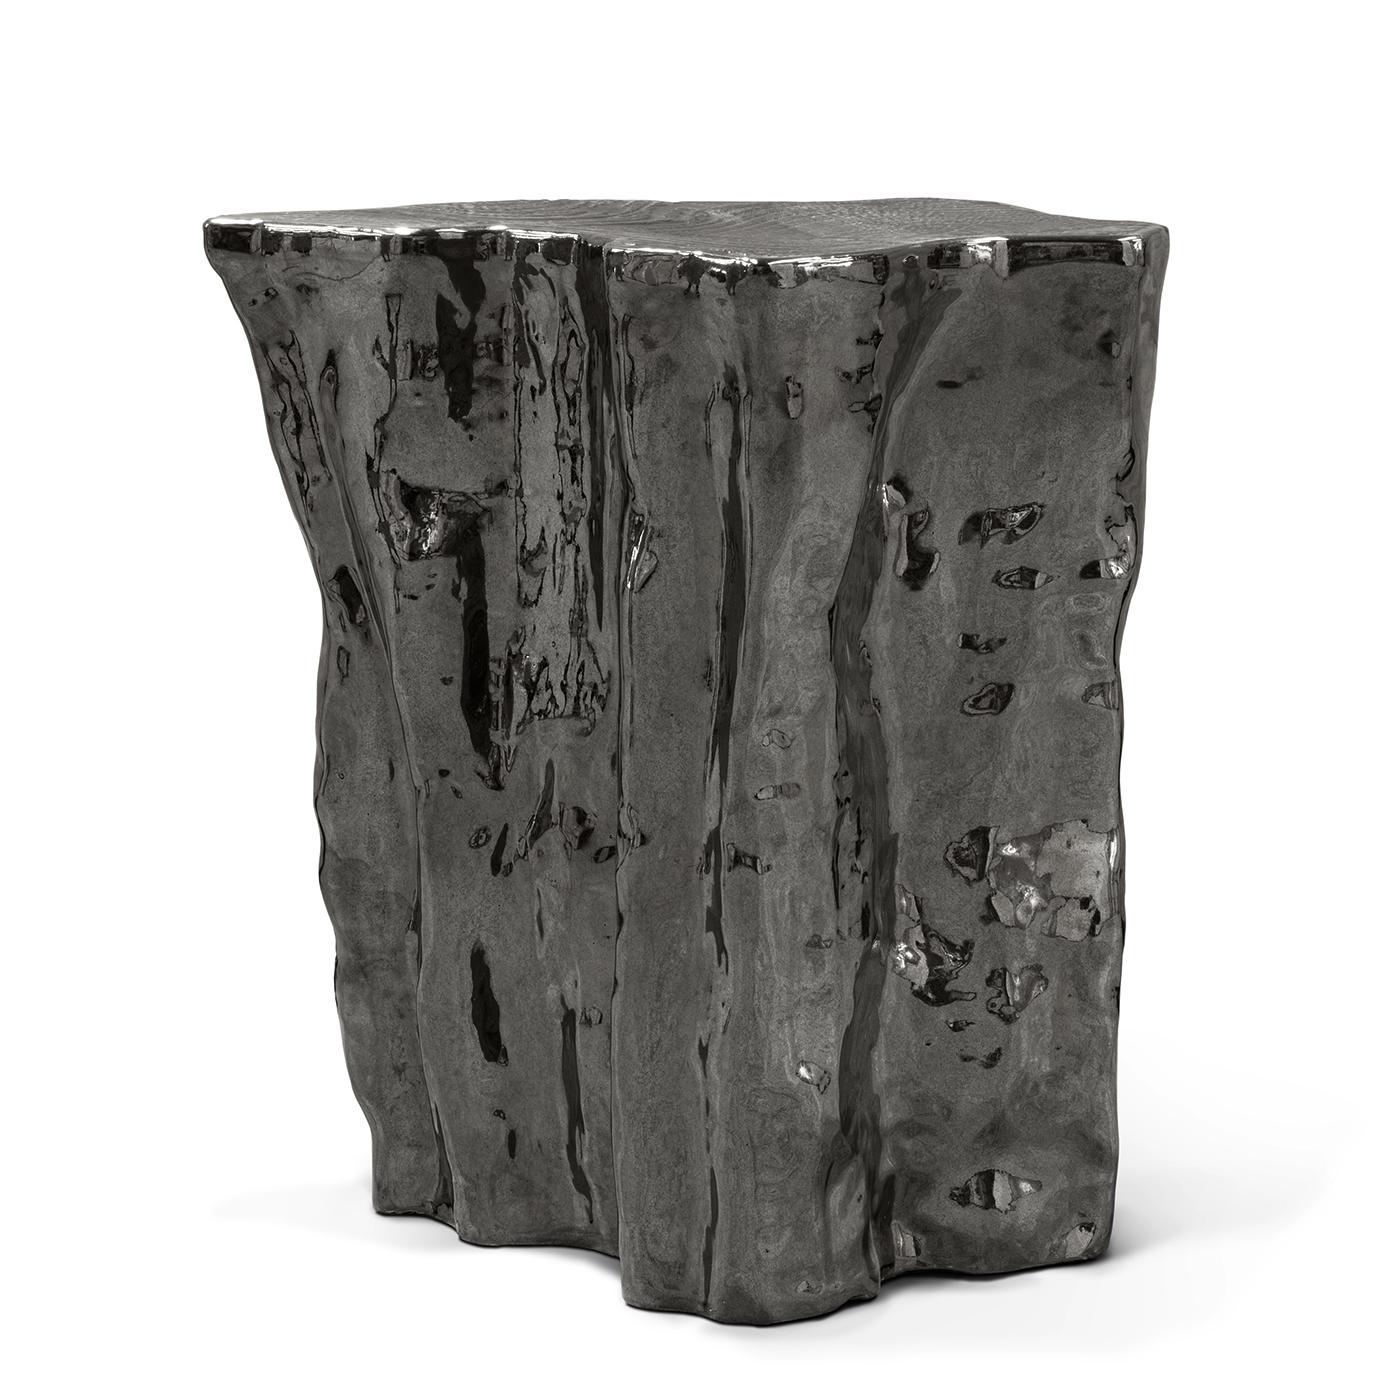 Side table heaven black low ceramic made 
in handcrafted black ceramic.
Also available in gold ceramic, on request.